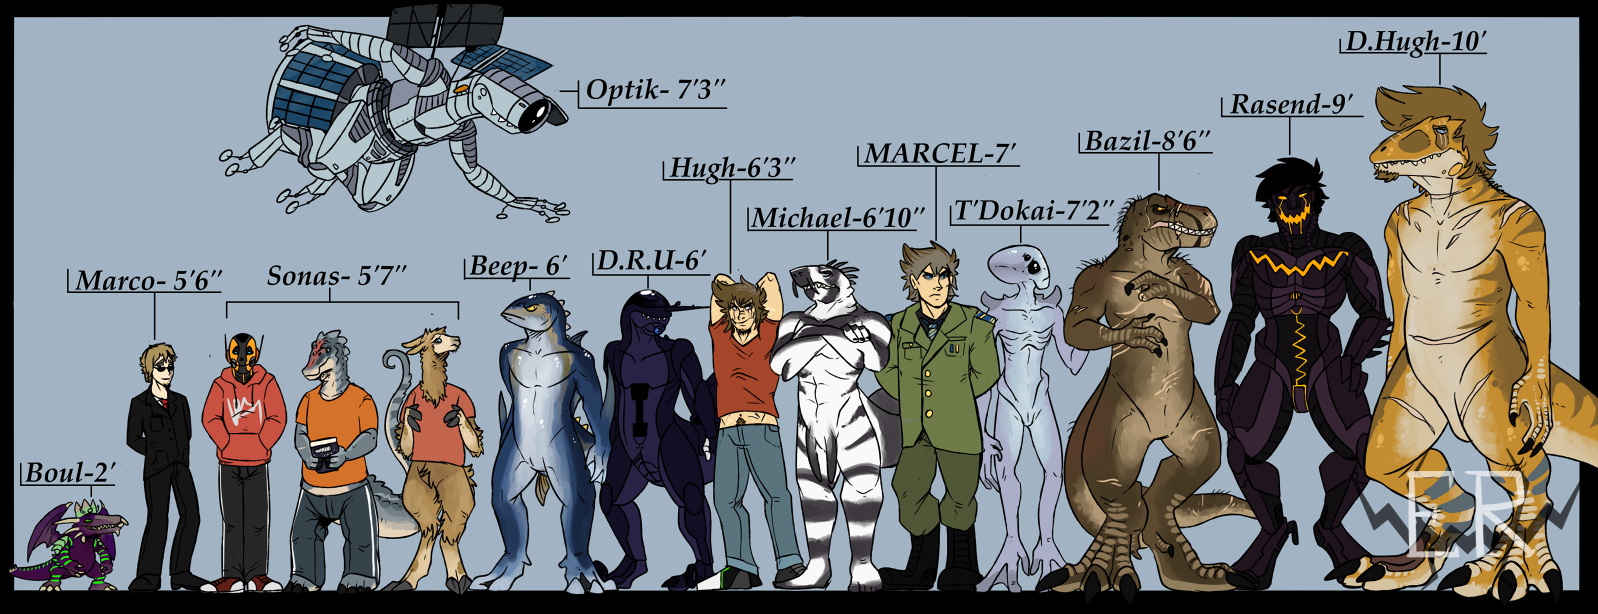 Character Height Comparison Chart By Emperorrasend Fur Affinity